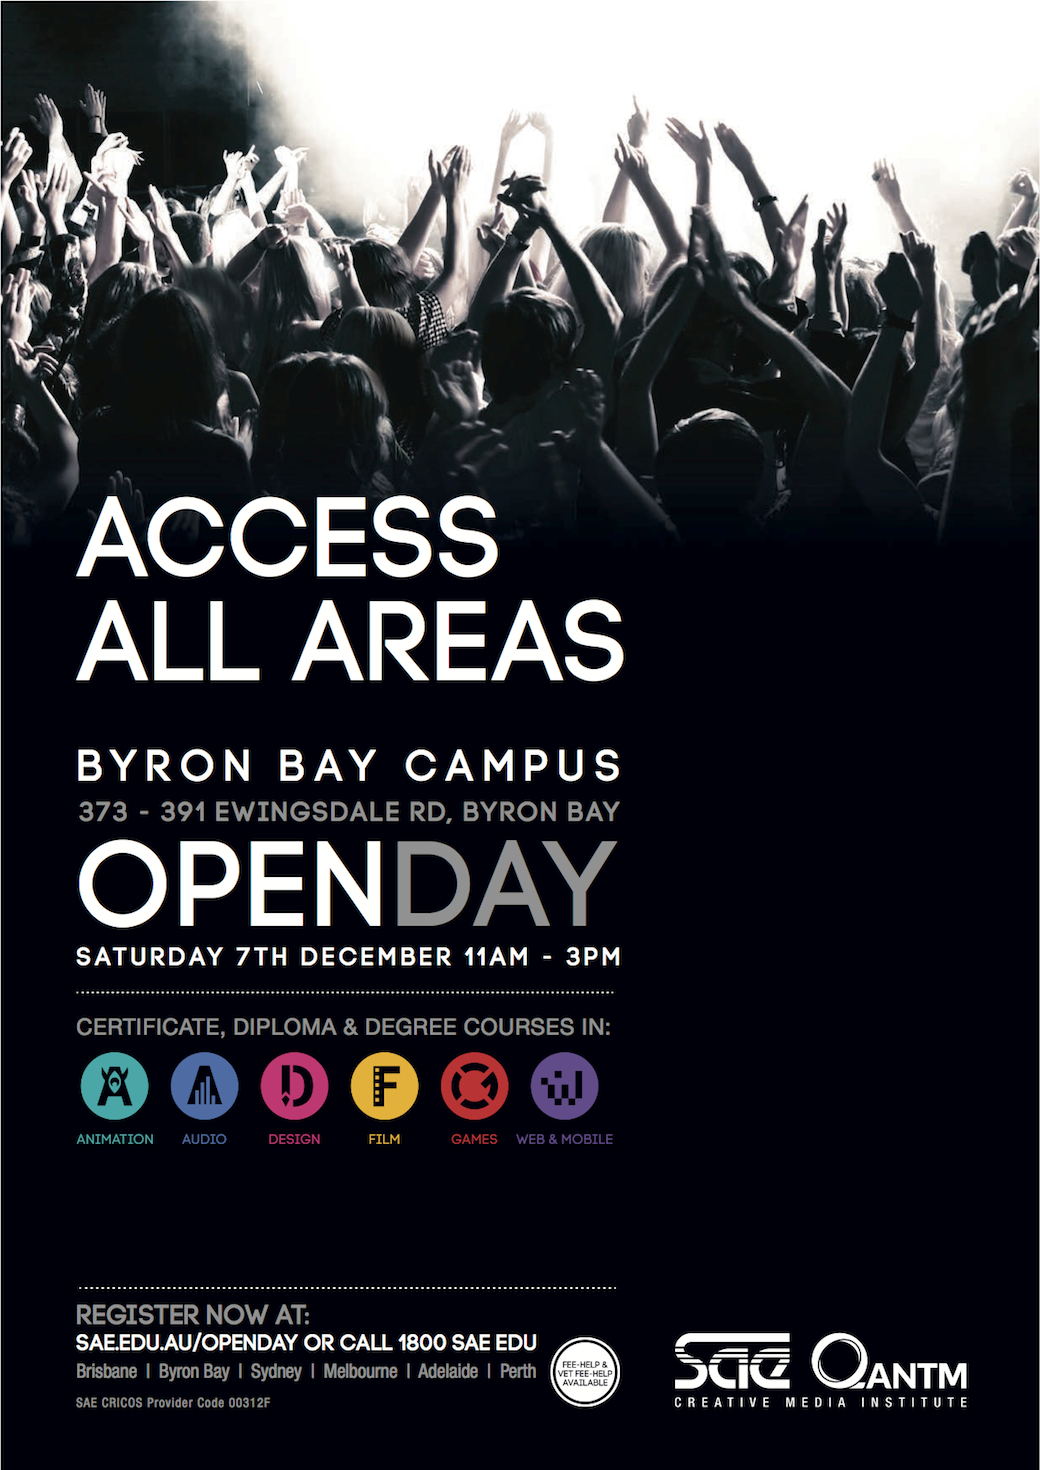 A4 POSTER - BYRON OPEN DAY_Dec 2013